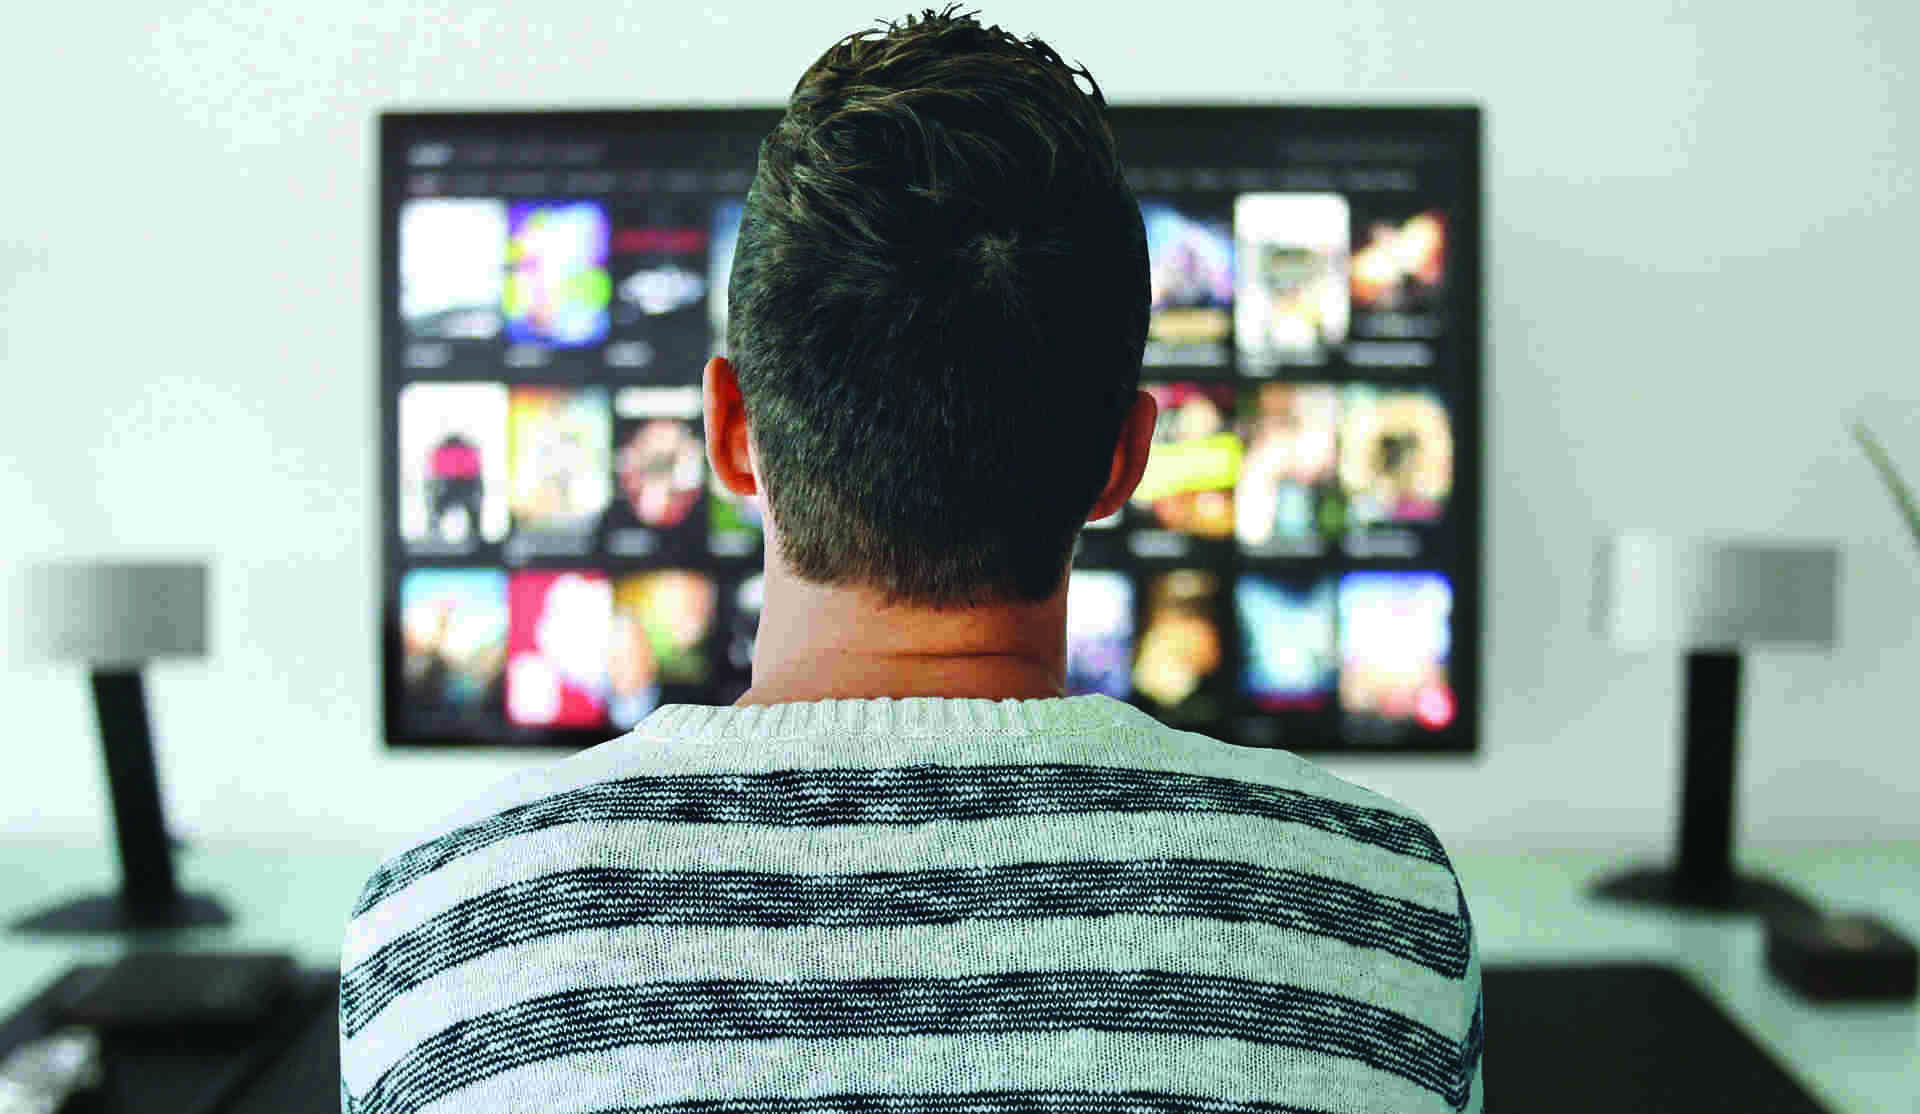 Govt issues new guidelines to curb misleading ads; bans surrogate ads